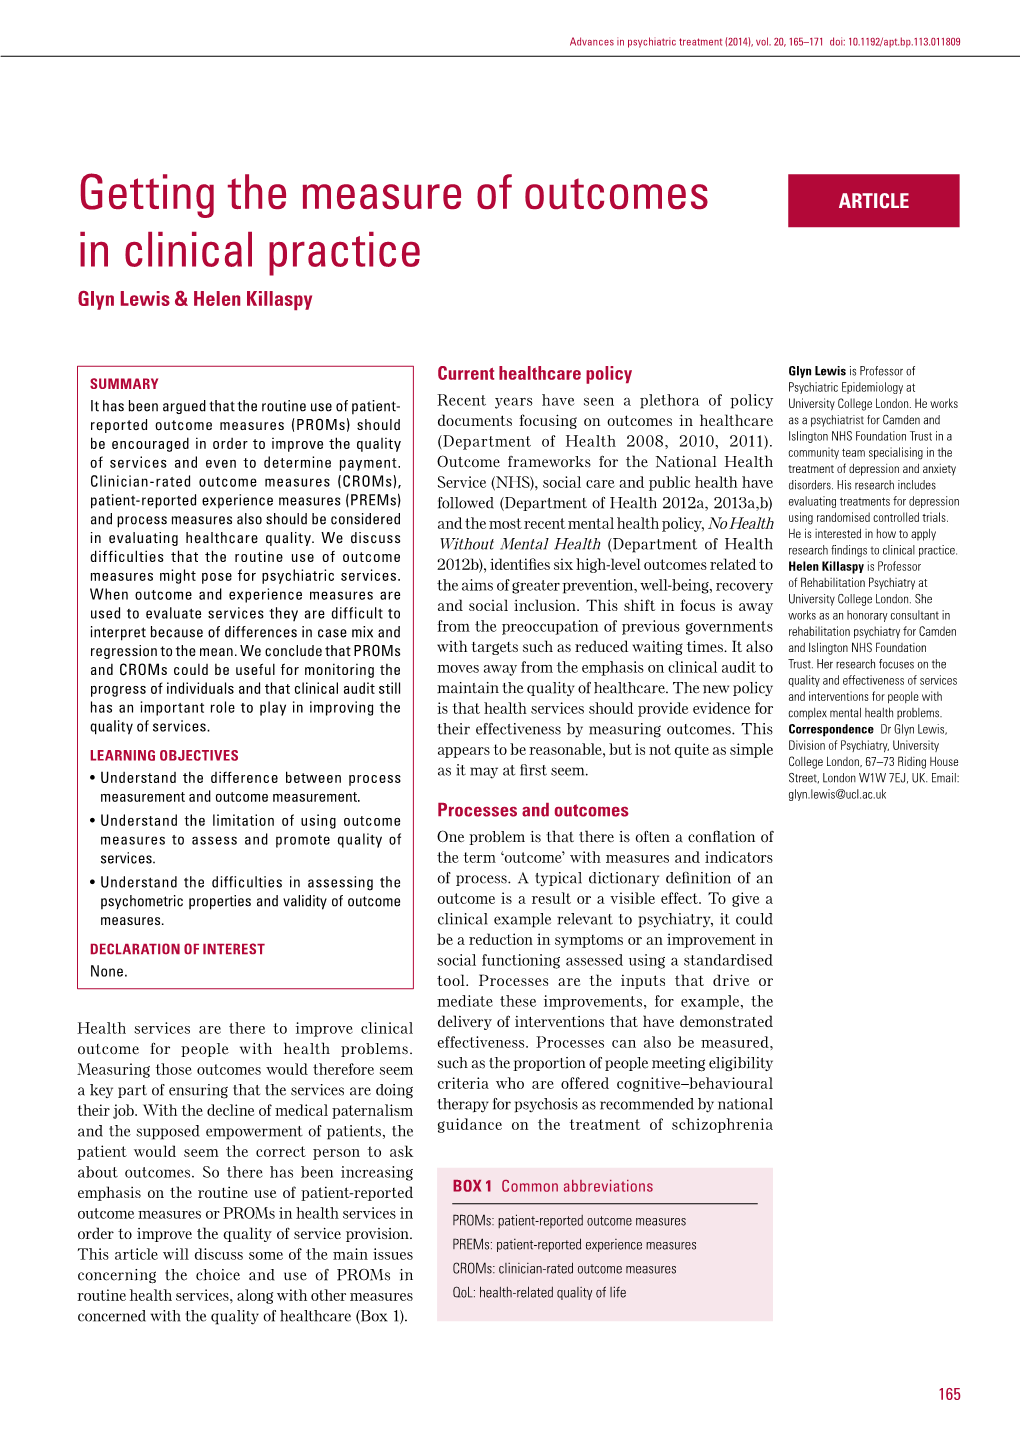 Getting the Measure of Outcomes in Clinical Practice